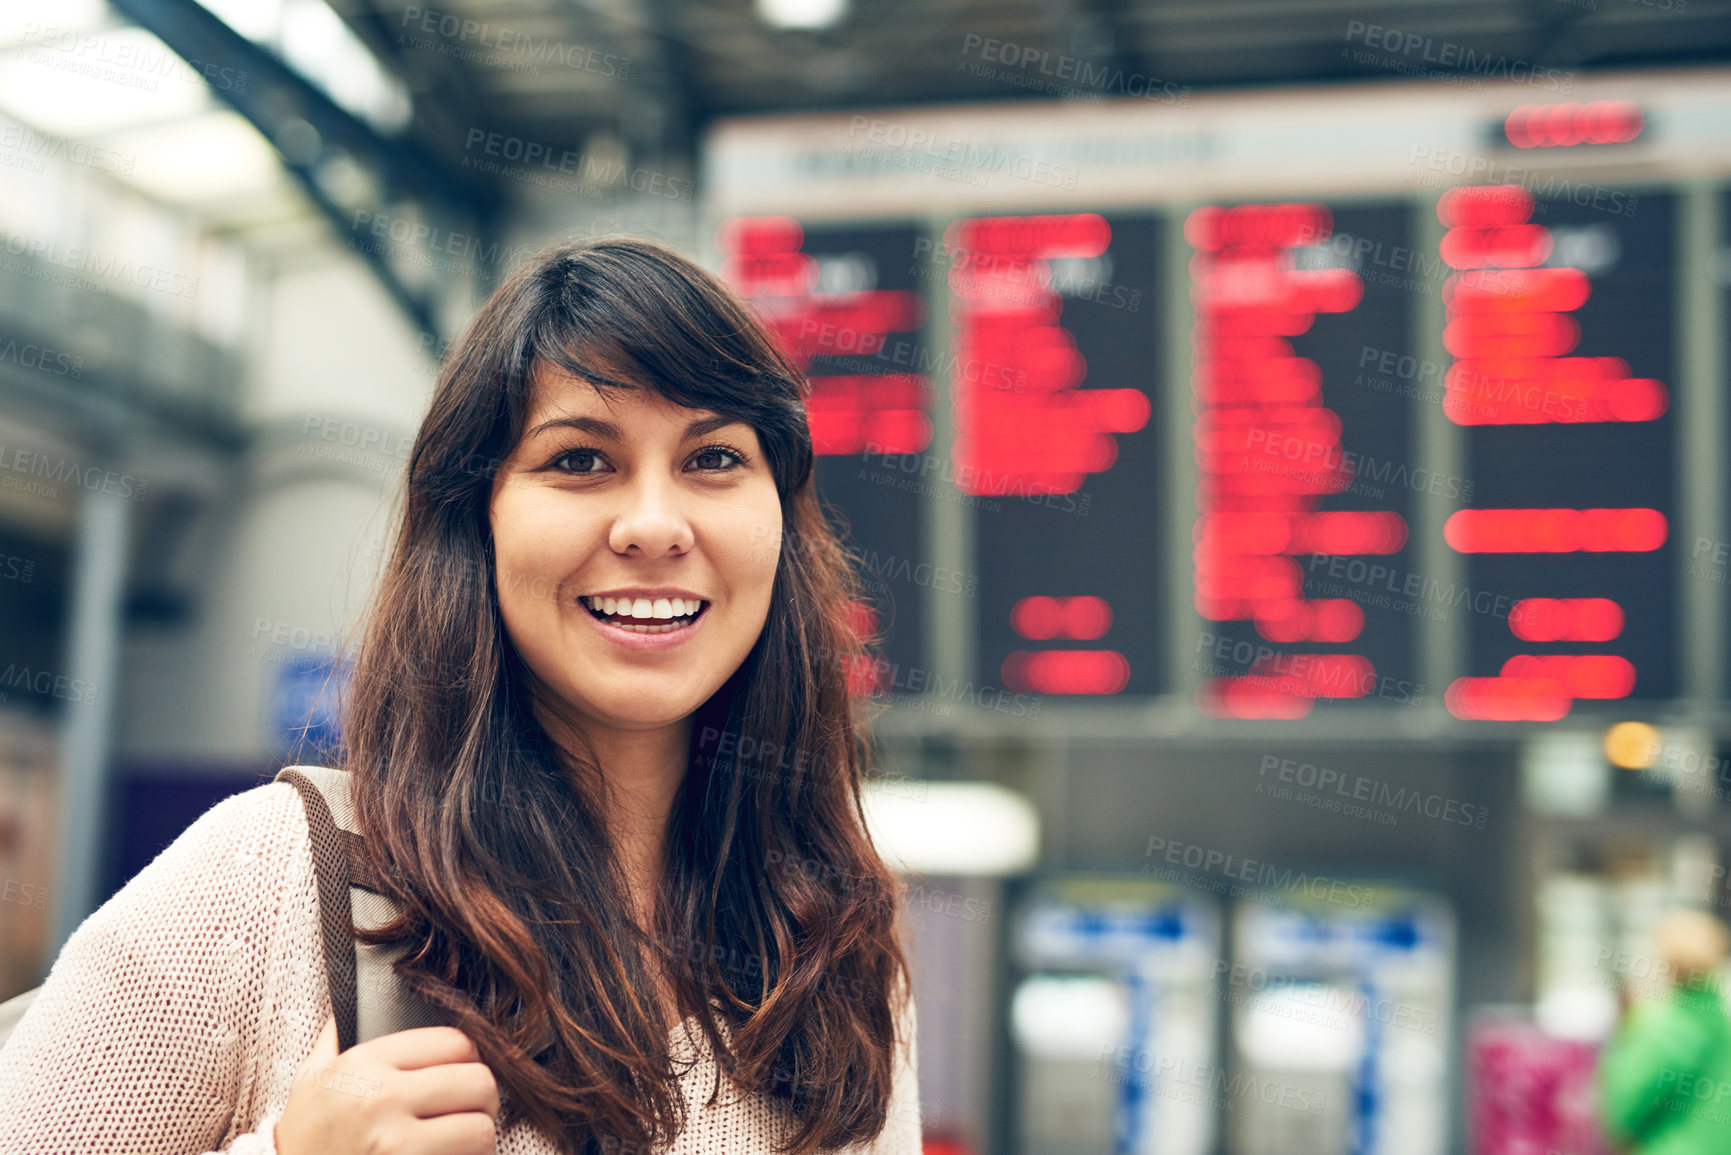 Buy stock photo Cropped portrait of an attractive young woman standing at an arrivals and departures board in the airport